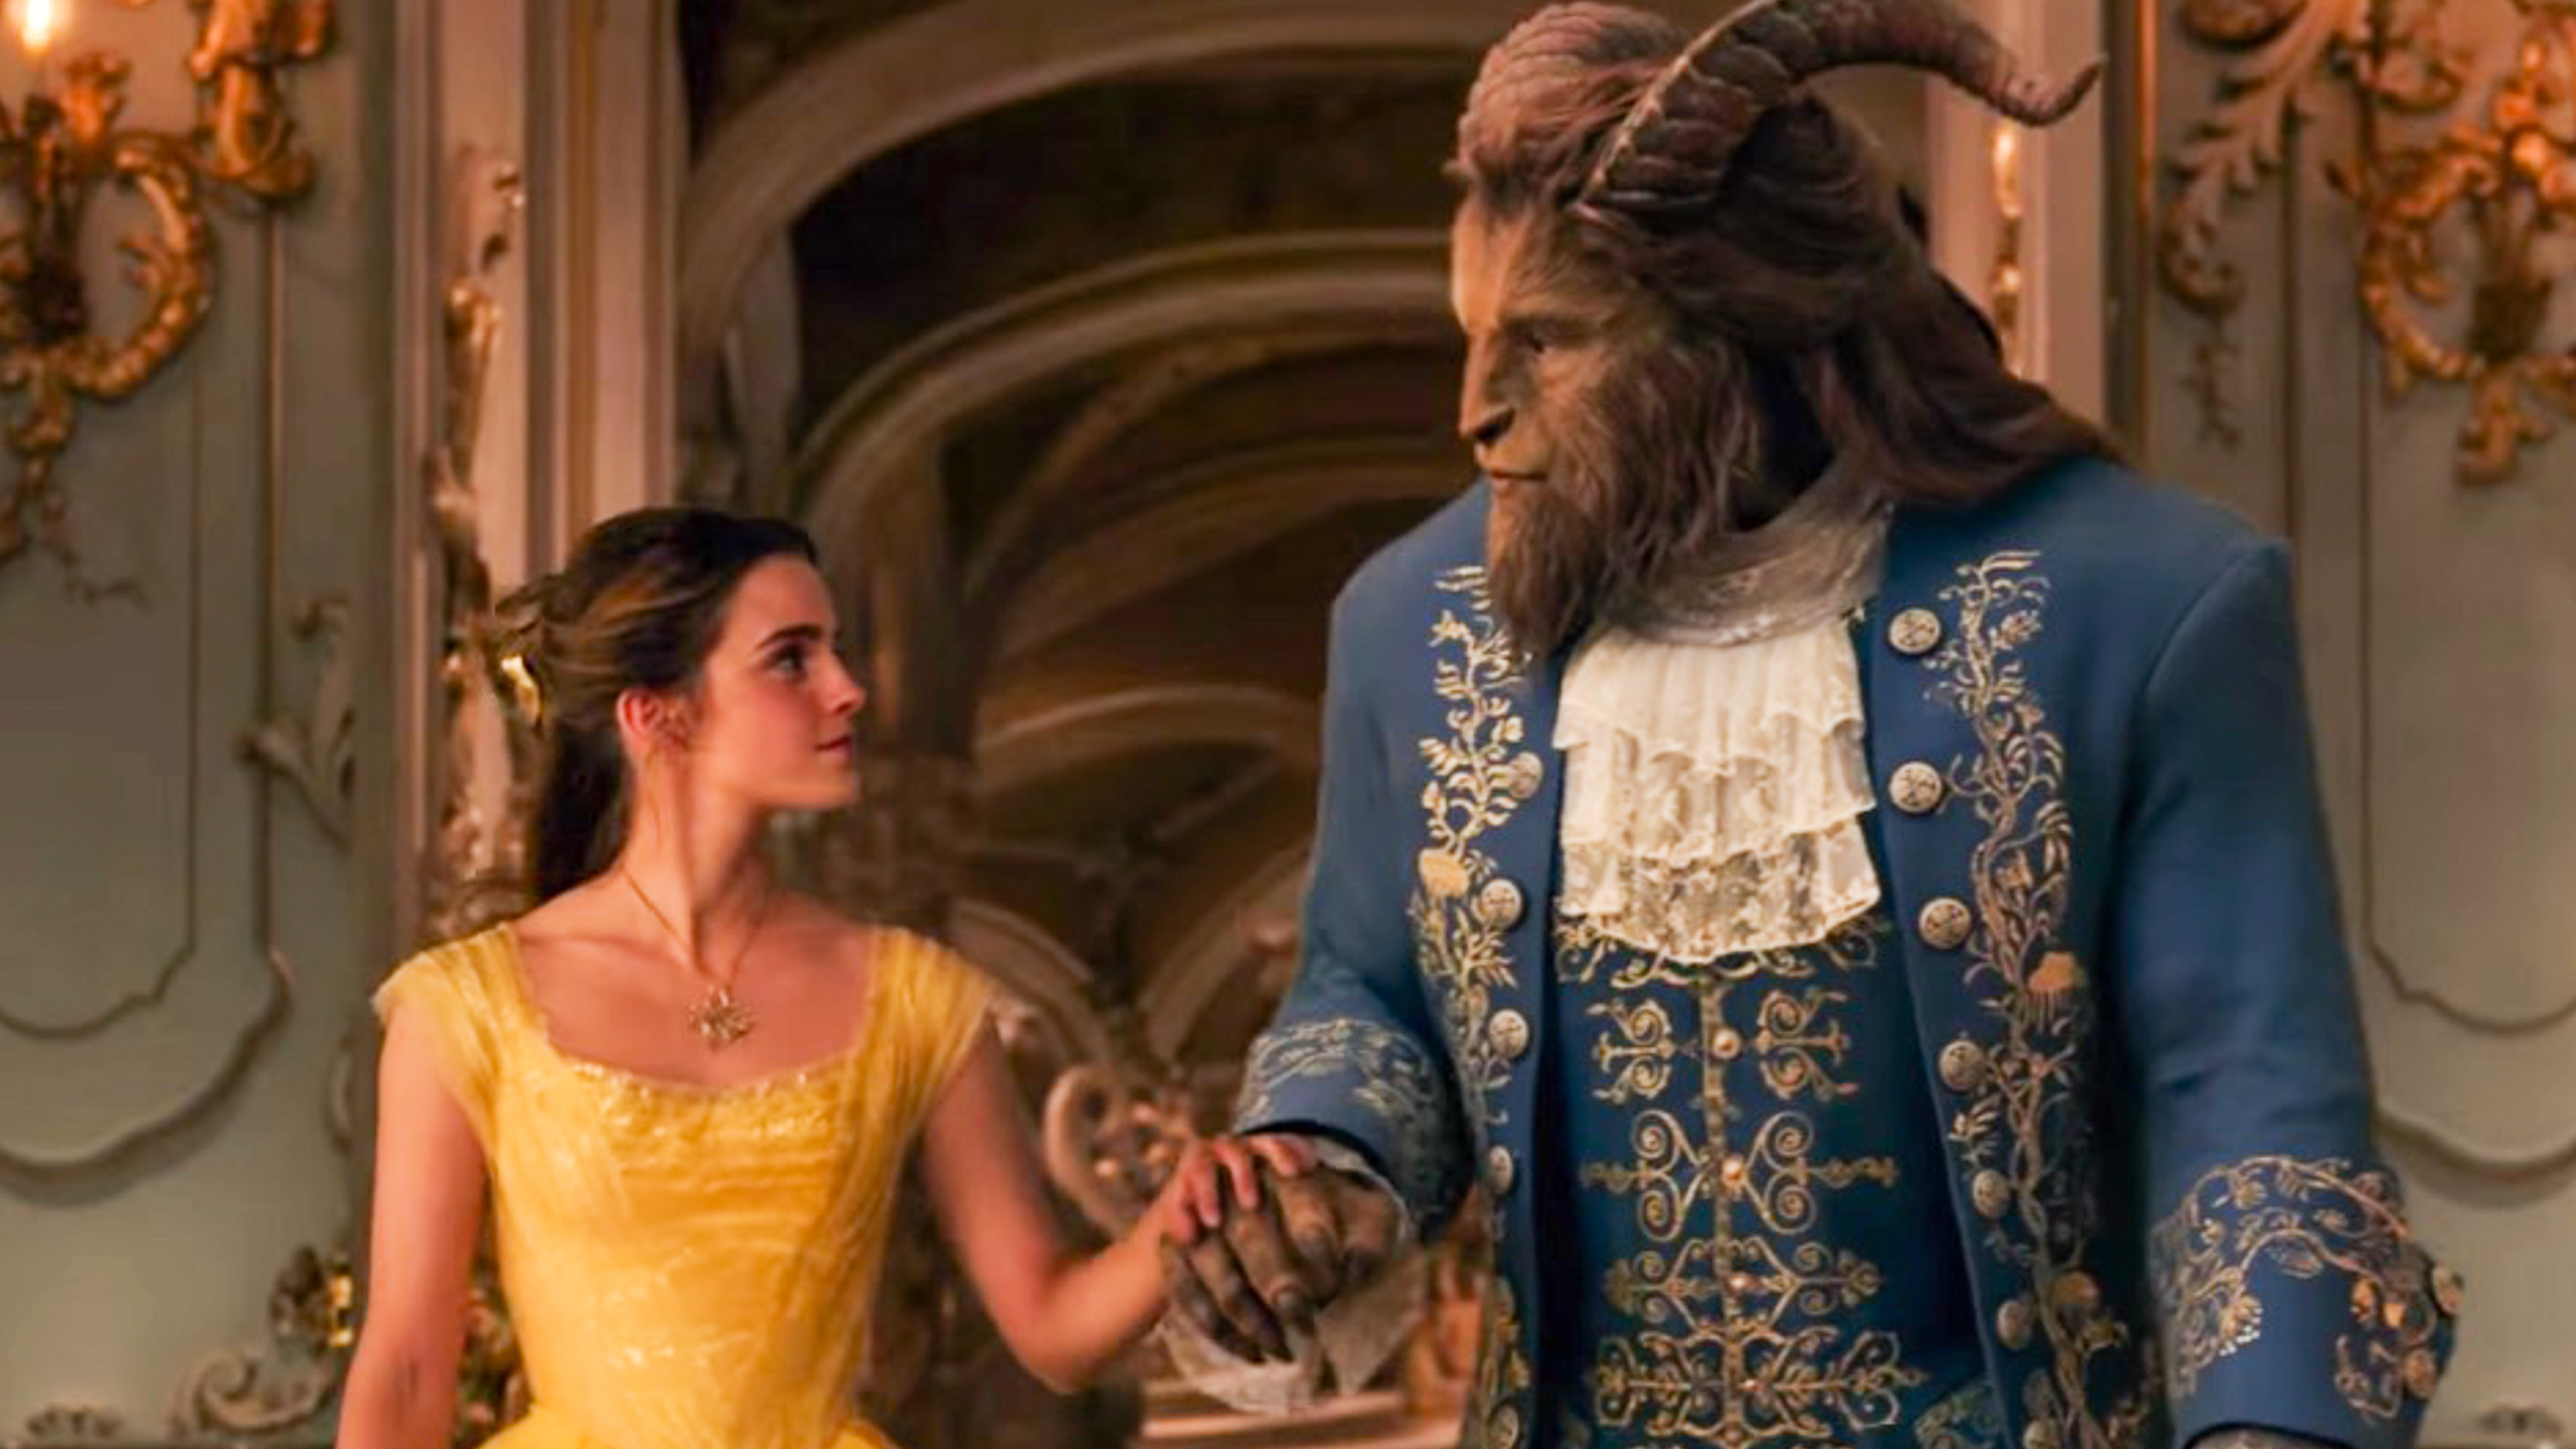 'Beauty and the Beast' review Pretty but redundant